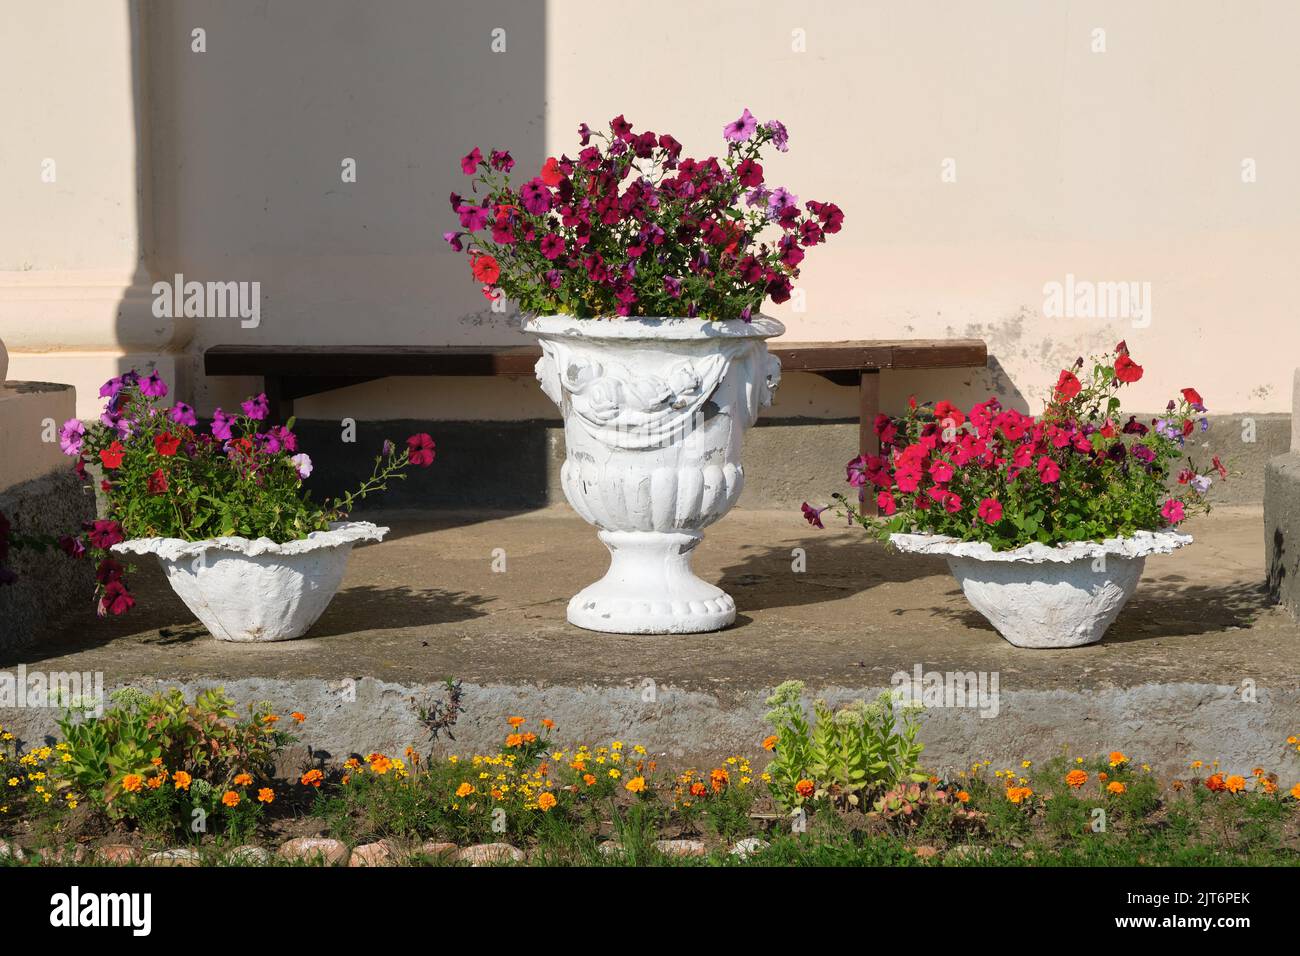 Outdoor concrete vases with flowers, flower pots with petunias. Classic garden design. Stock Photo